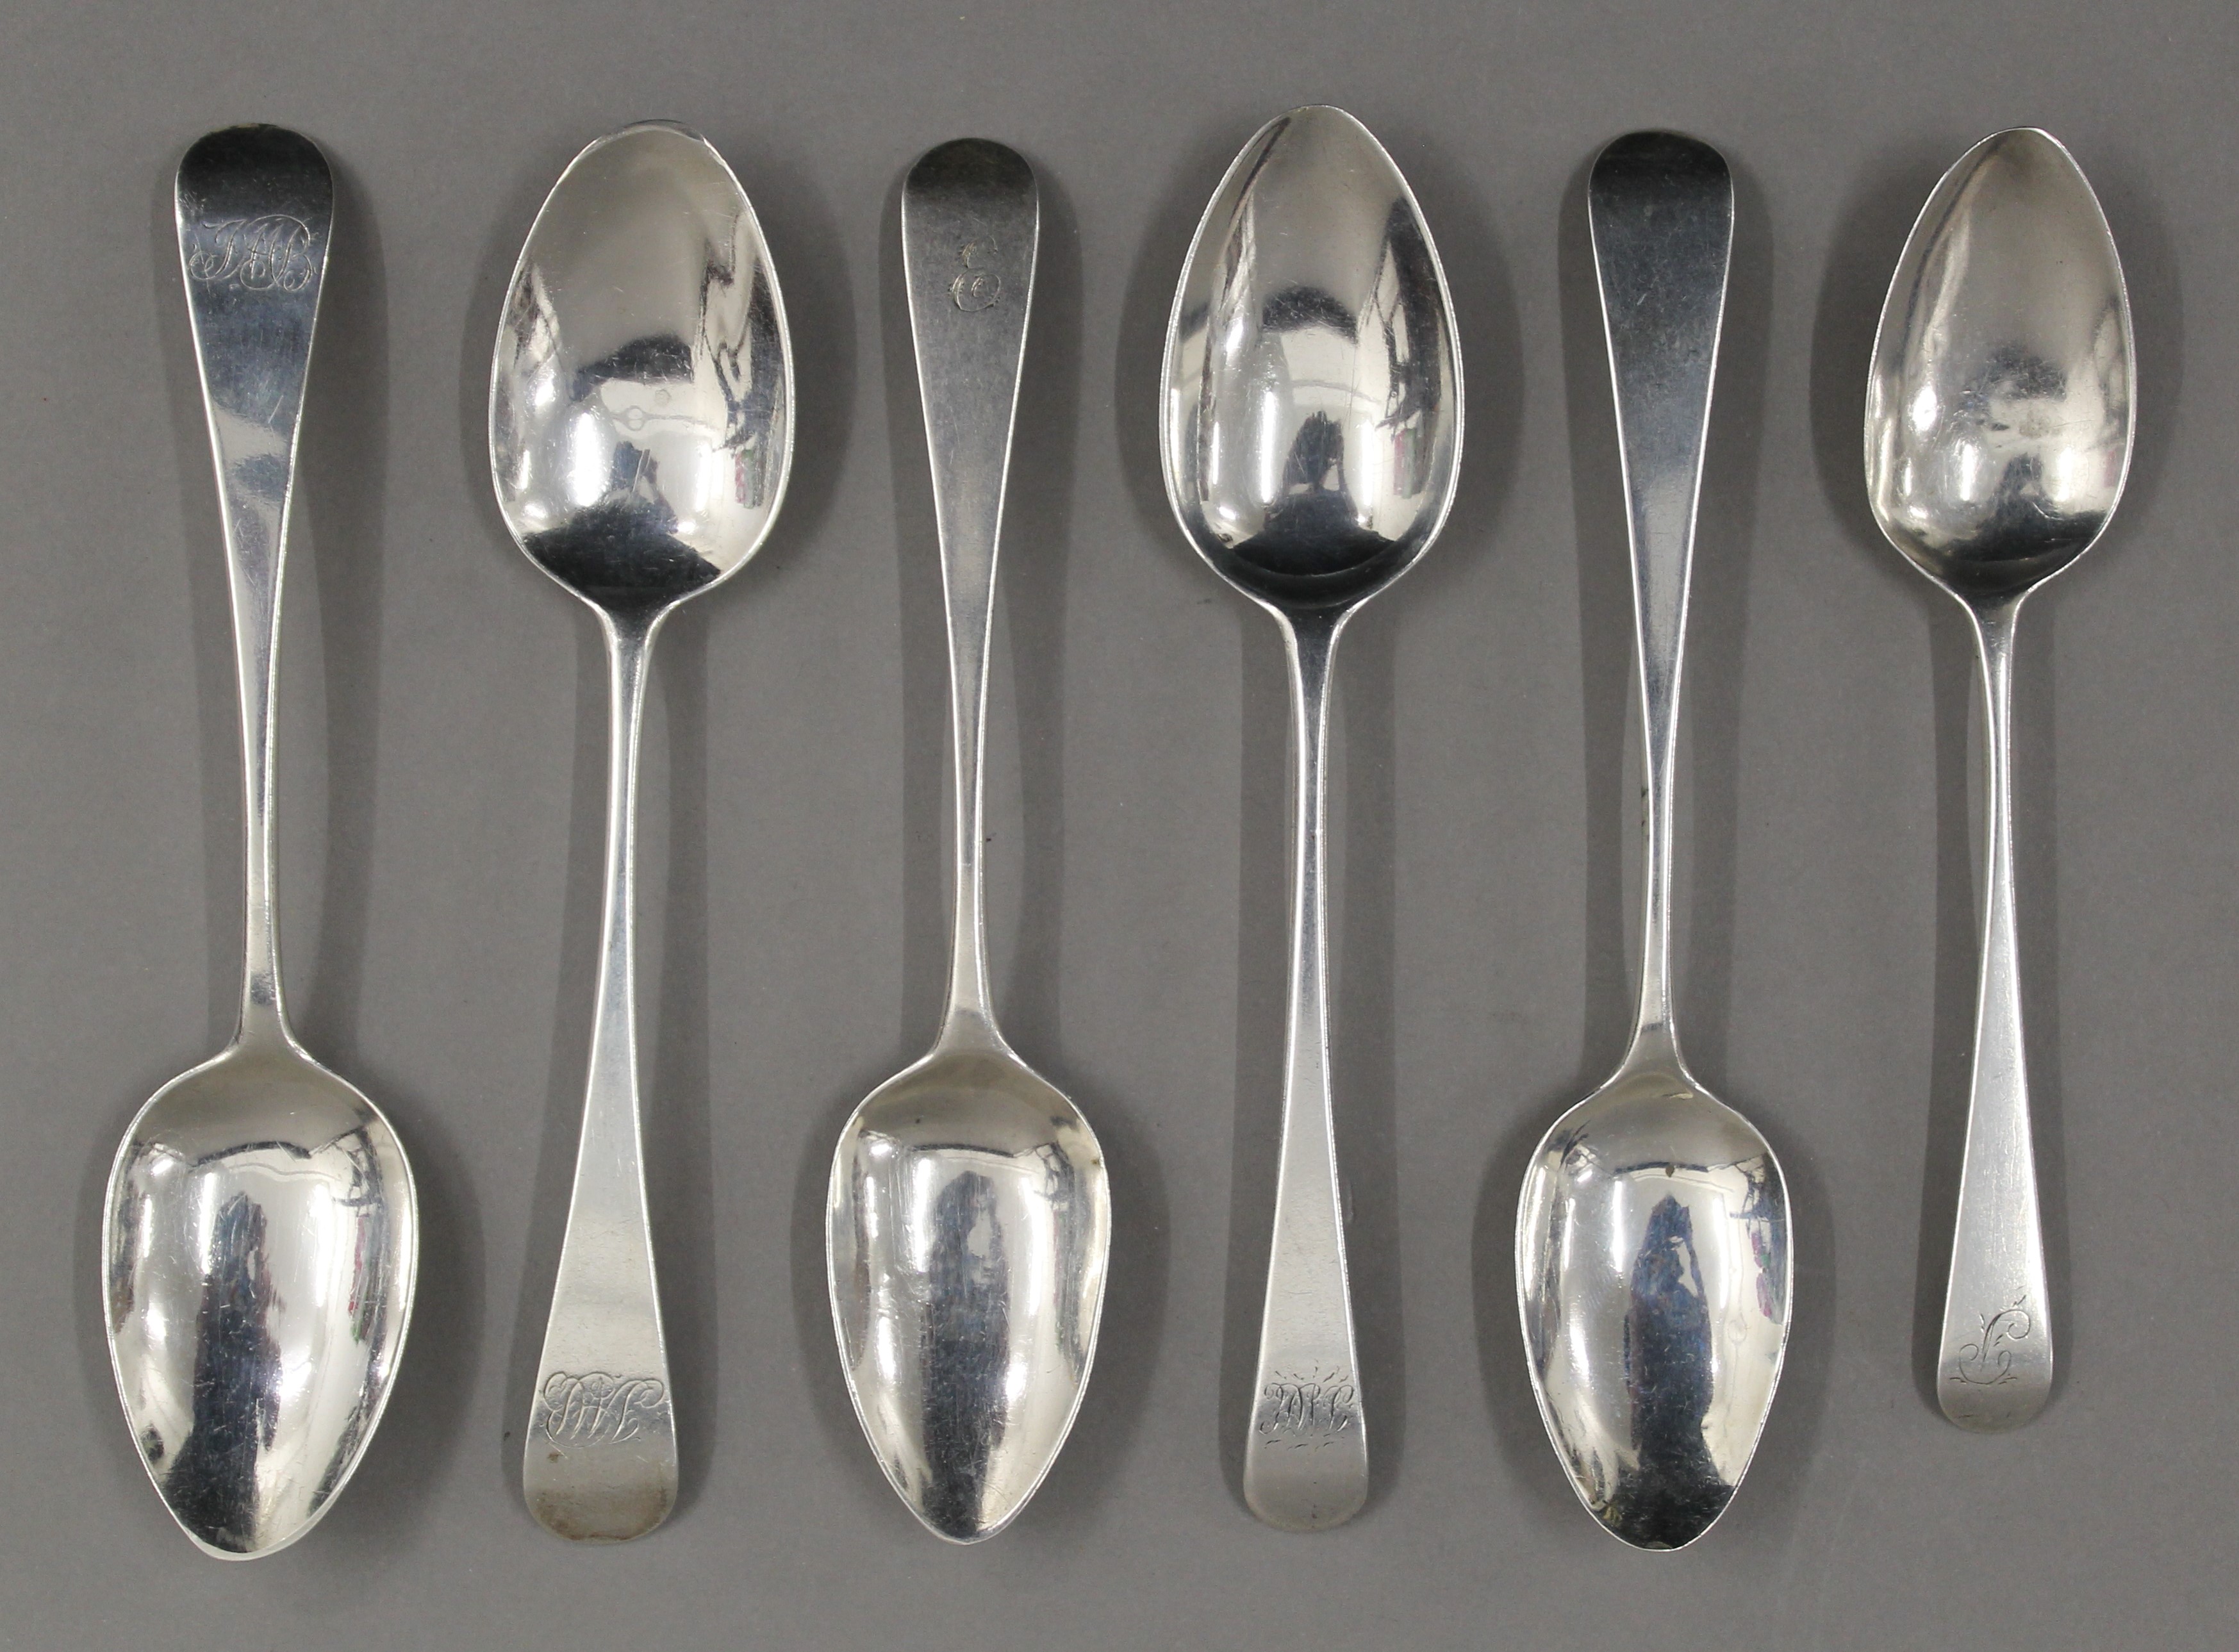 Six early 19th century Old English pattern teaspoons by William Bateman of London. 95.7 grammes.